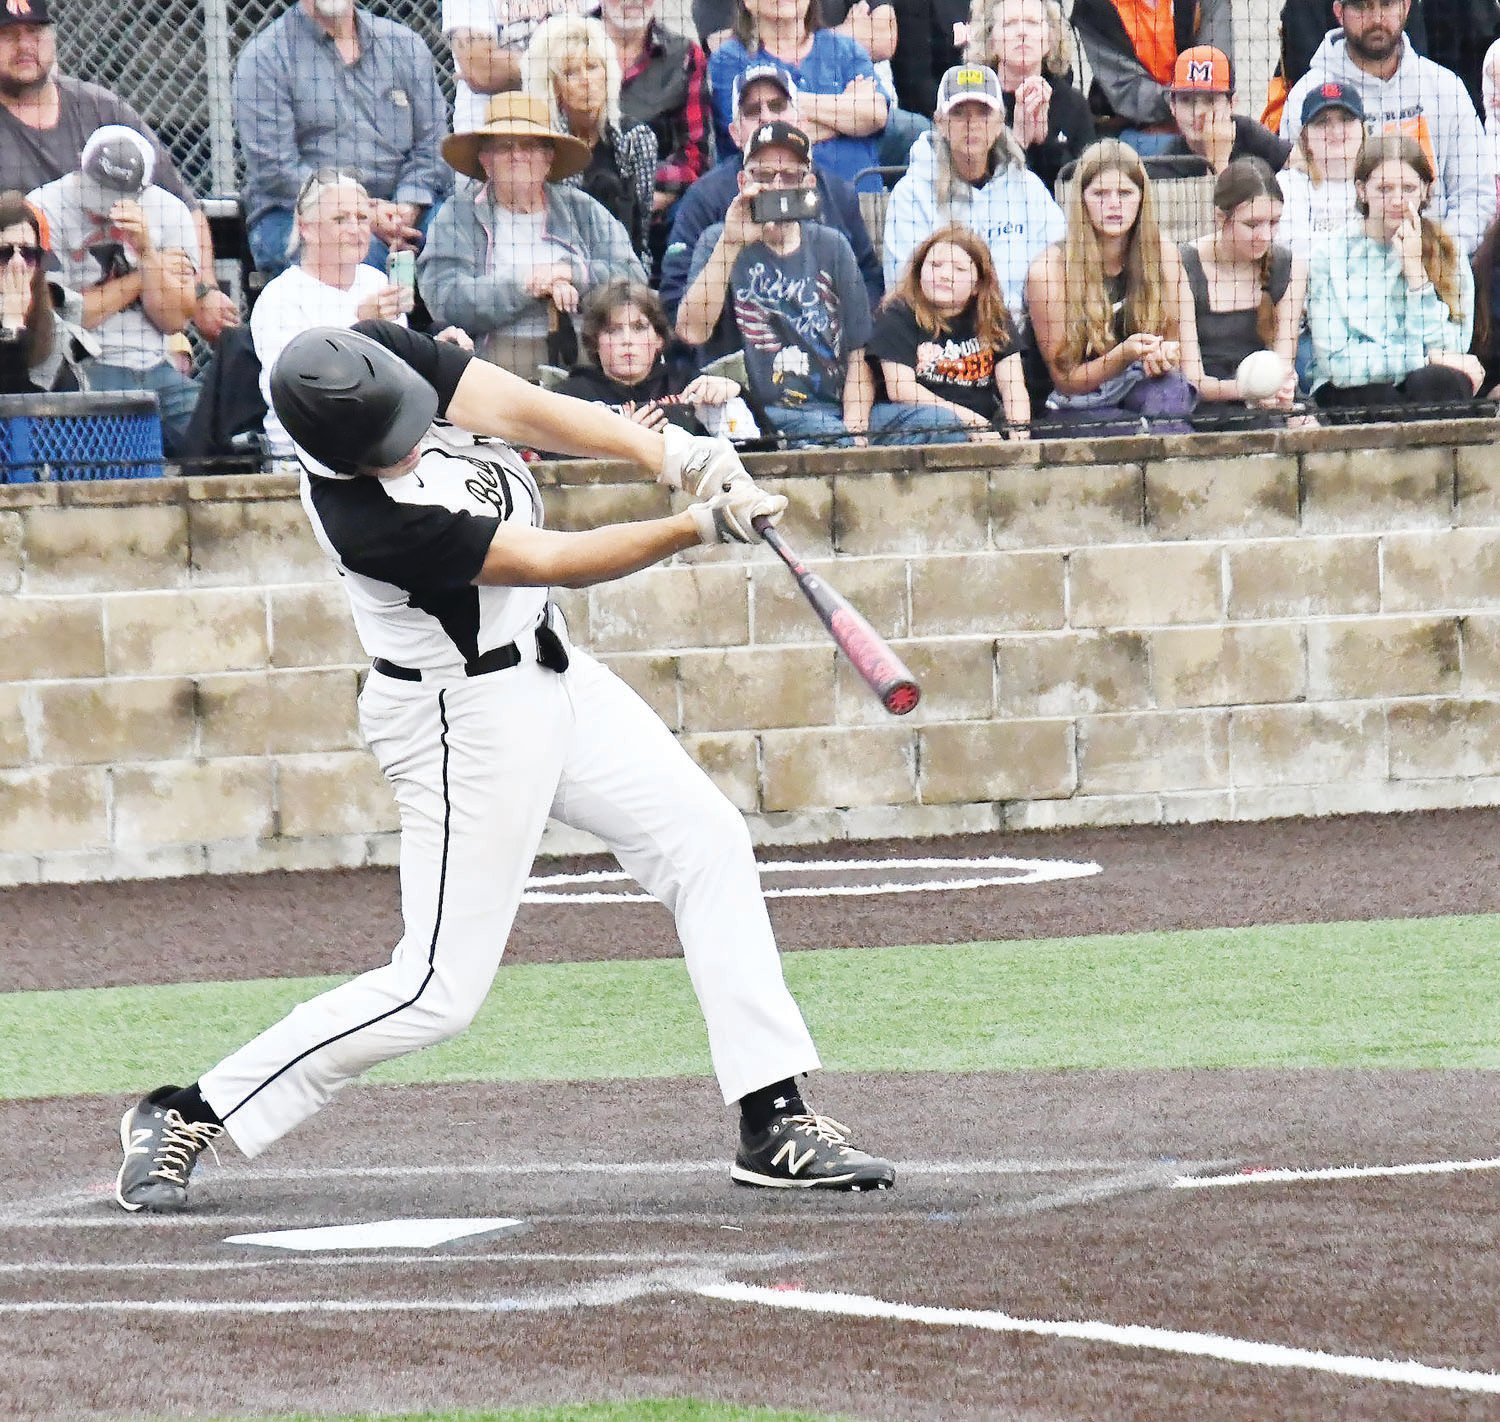 Cairo baseball player Gage Wilson hits a grand slam on Wednesday evening at General Omar Bradley Field, propelling the Bearcats to the Class 1 state championship on Monday.